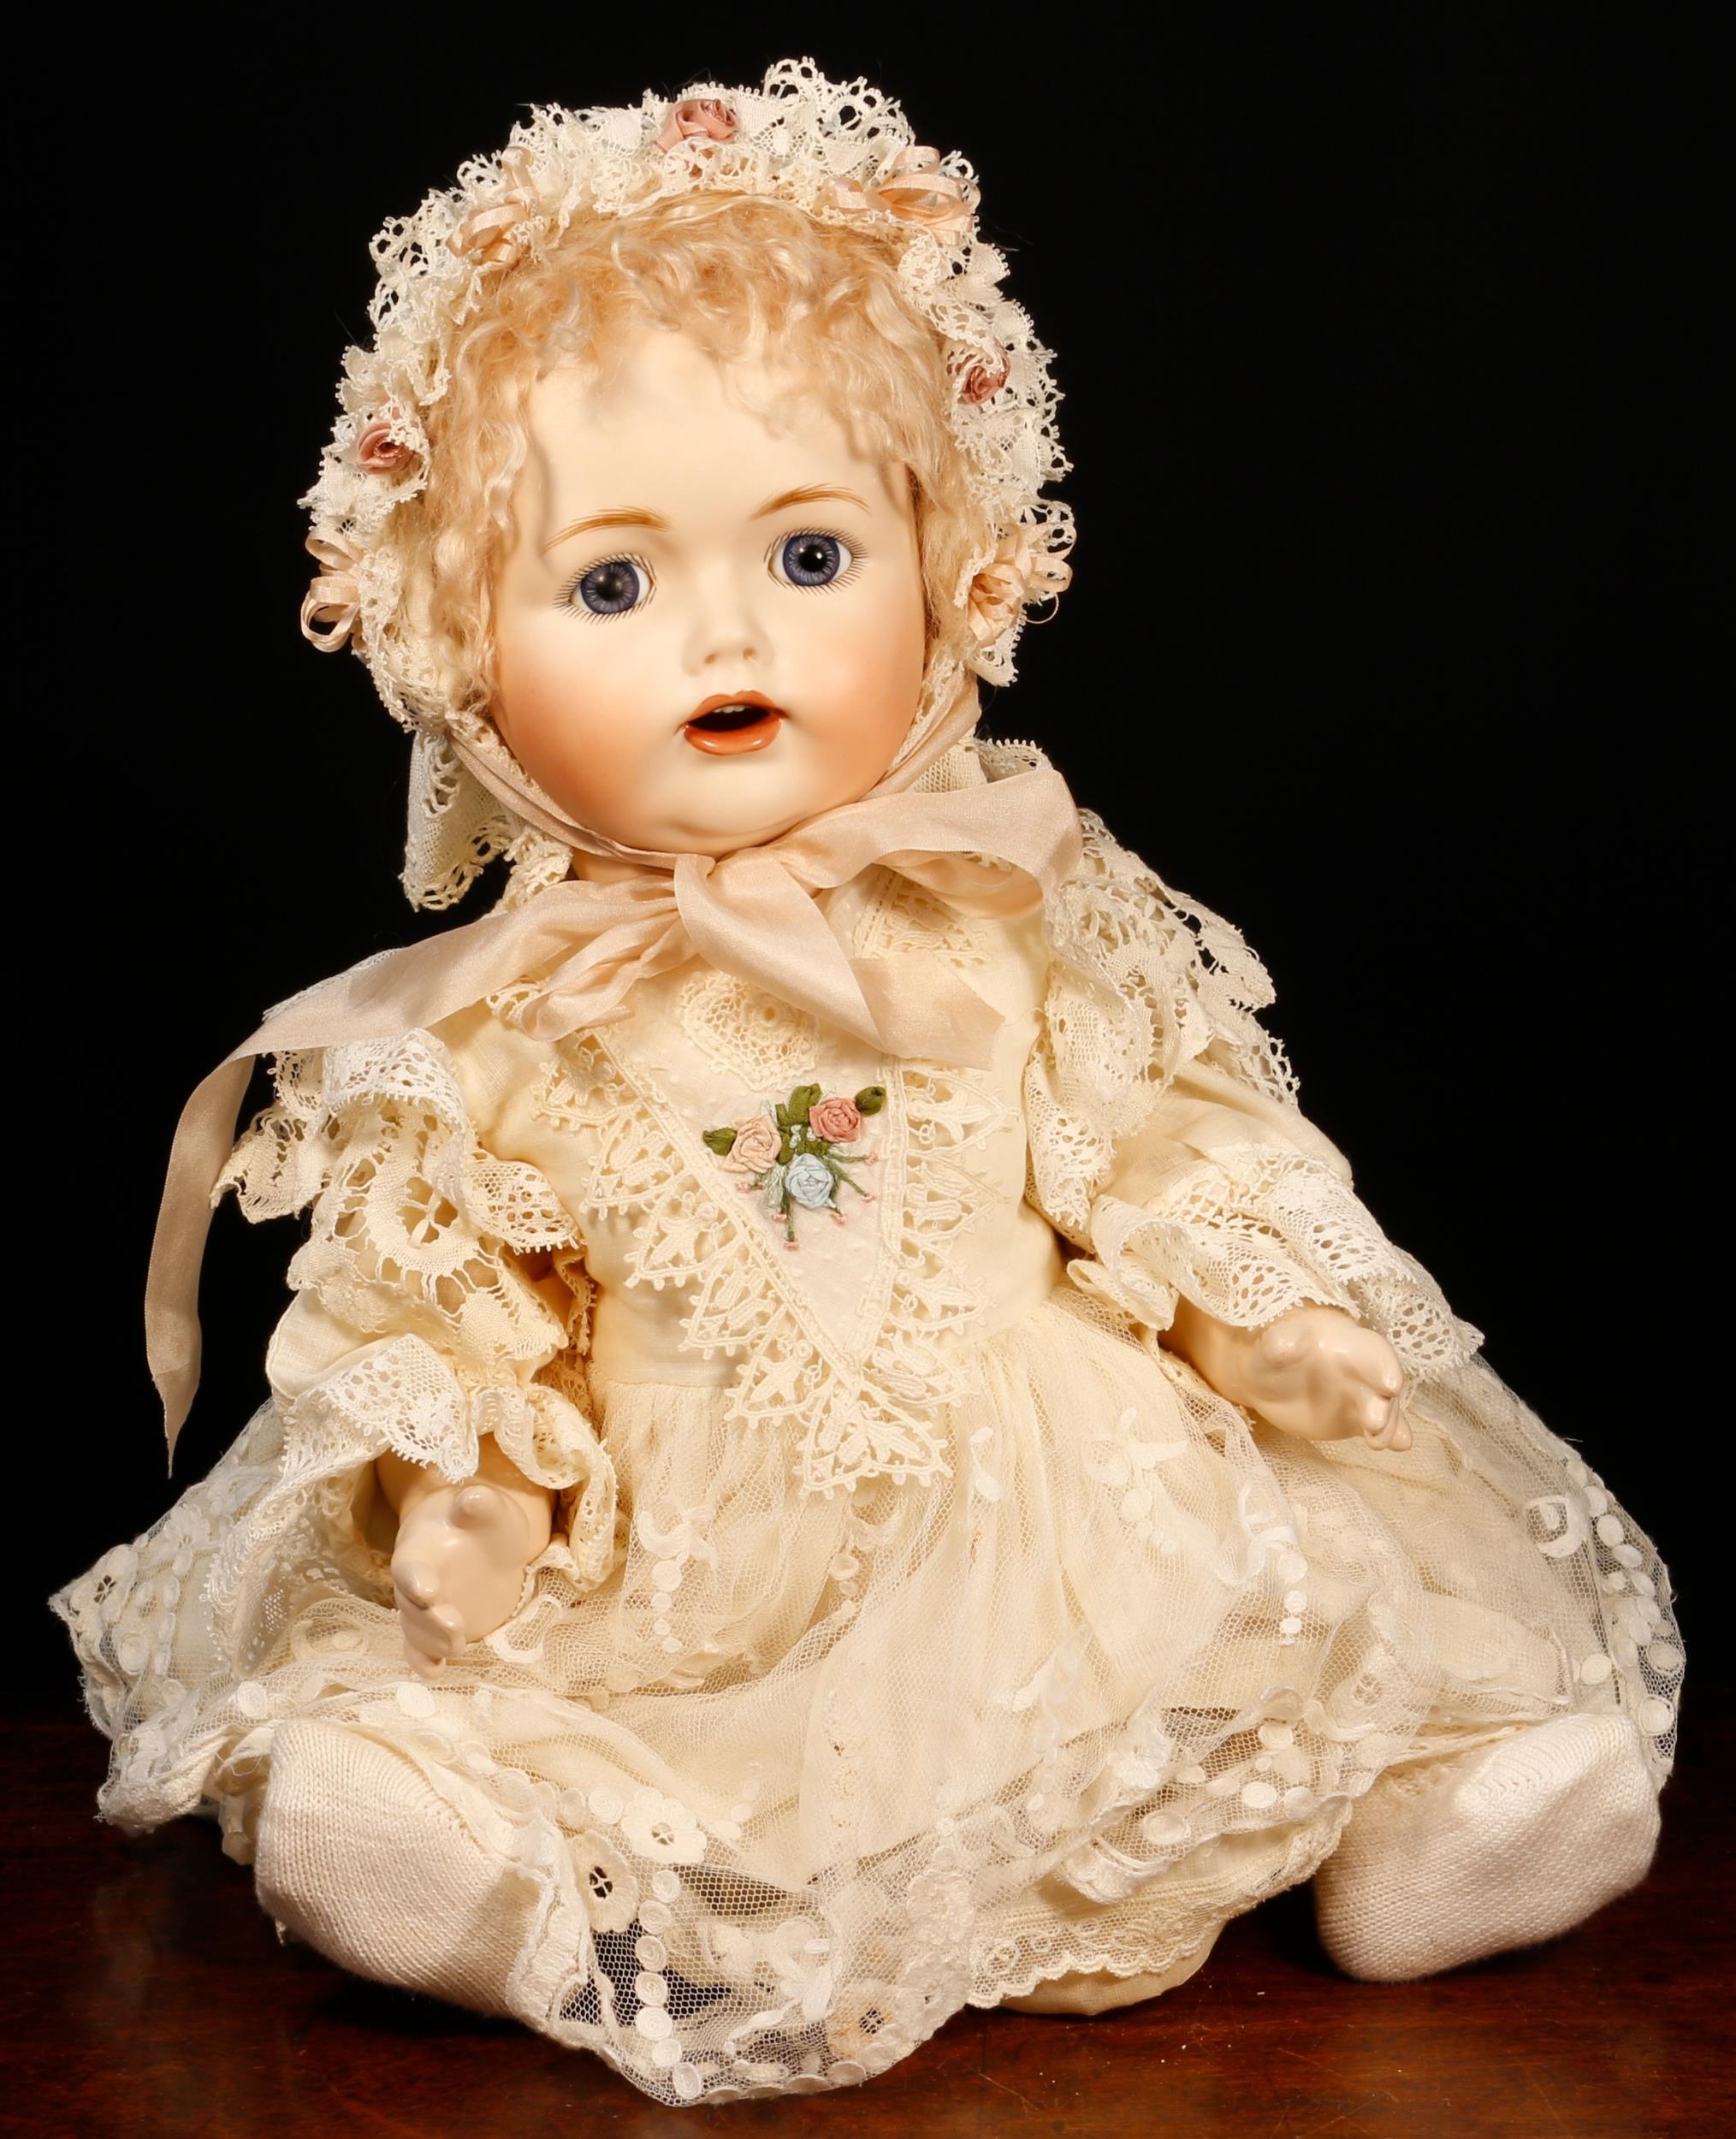 A reproduction bisque head and painted composition bodied doll, the bisque head inset with blue